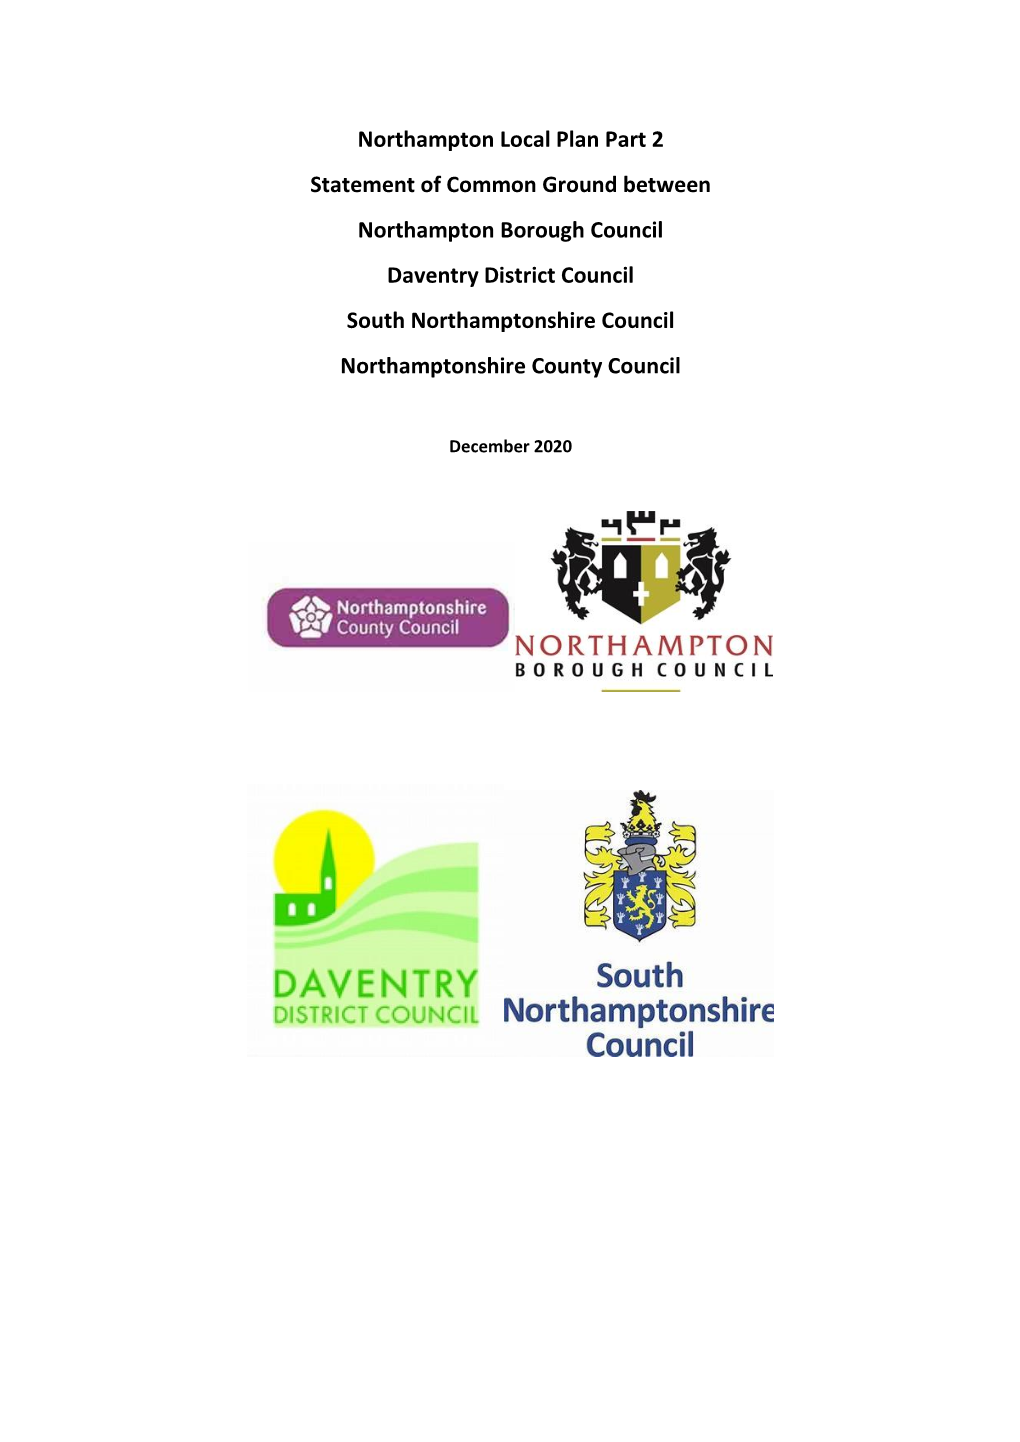 Northampton Local Plan Part 2 Statement of Common Ground Between Northampton Borough Council Daventry District Council South